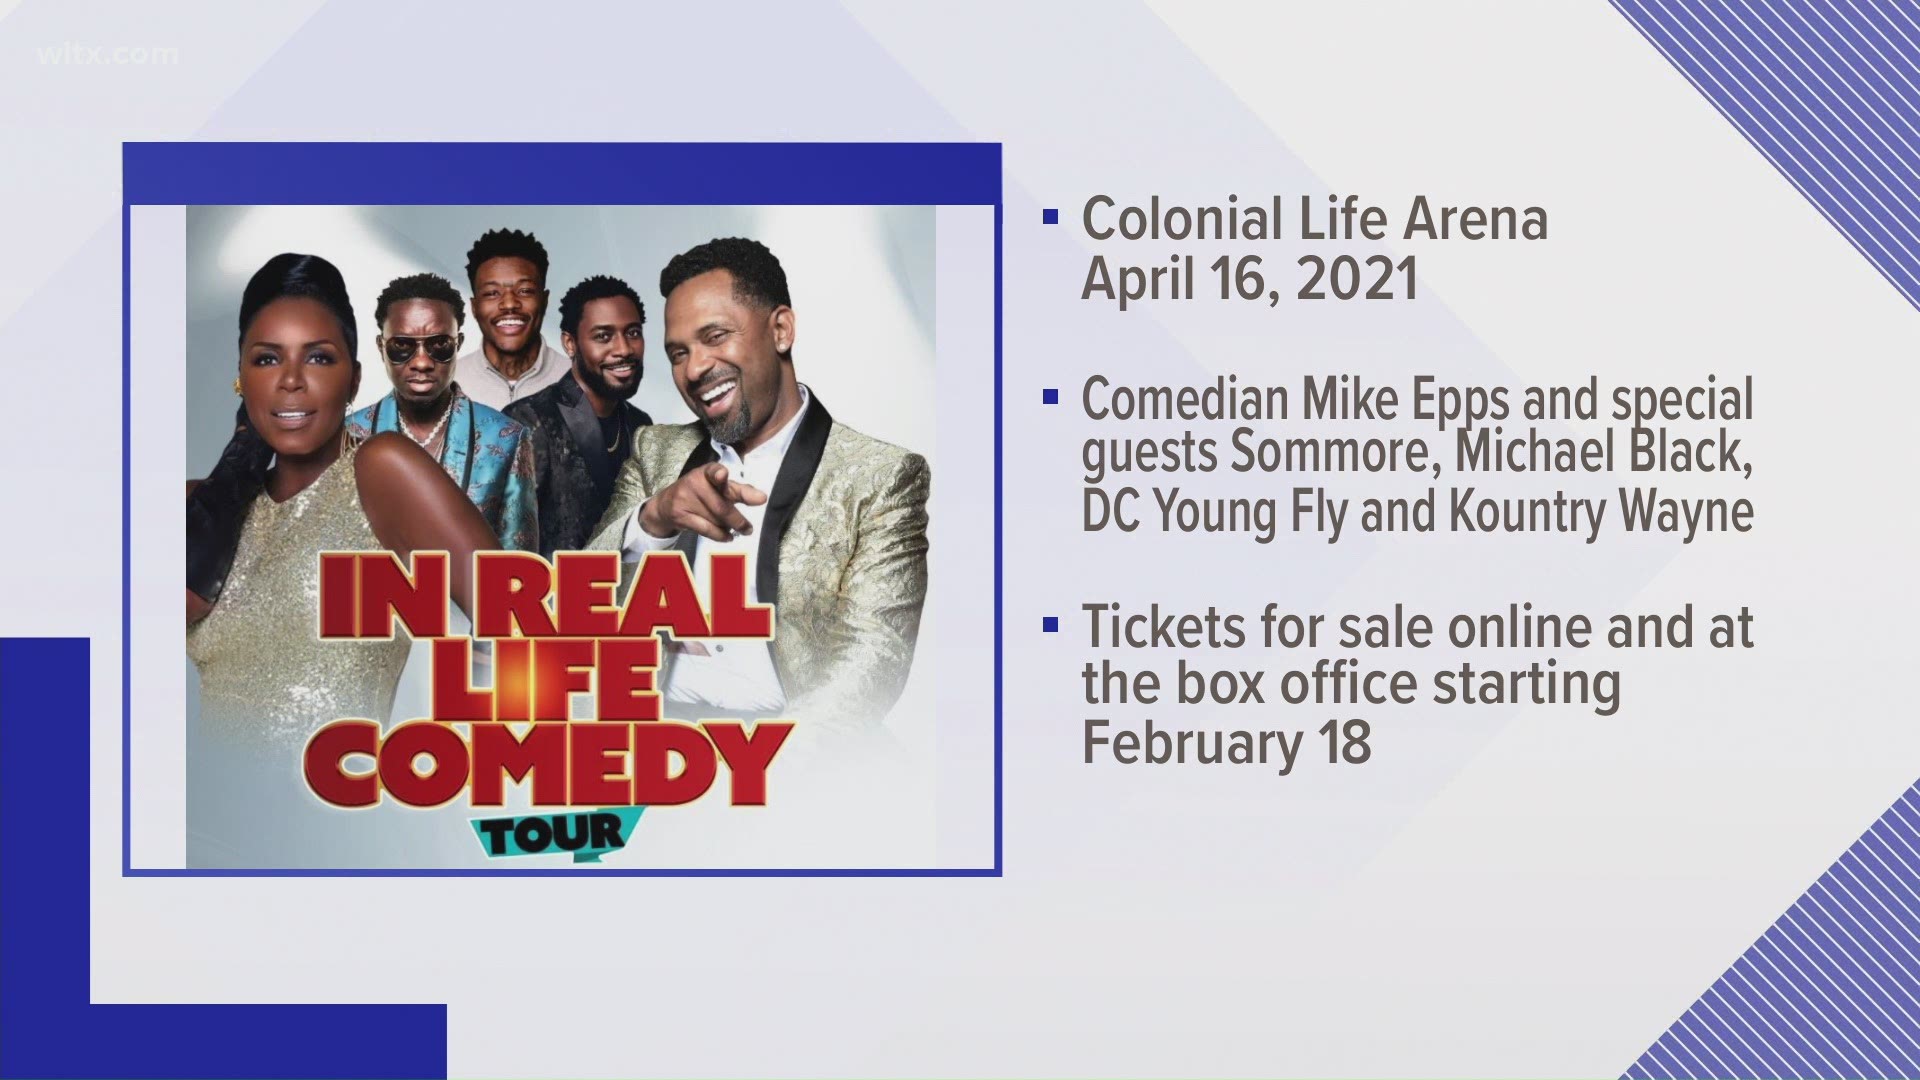 Colonial Life Arena announced Mike Epps' In Real Life Comedy tour will be hitting the stage at the Columbia venue on April 16, 2021.